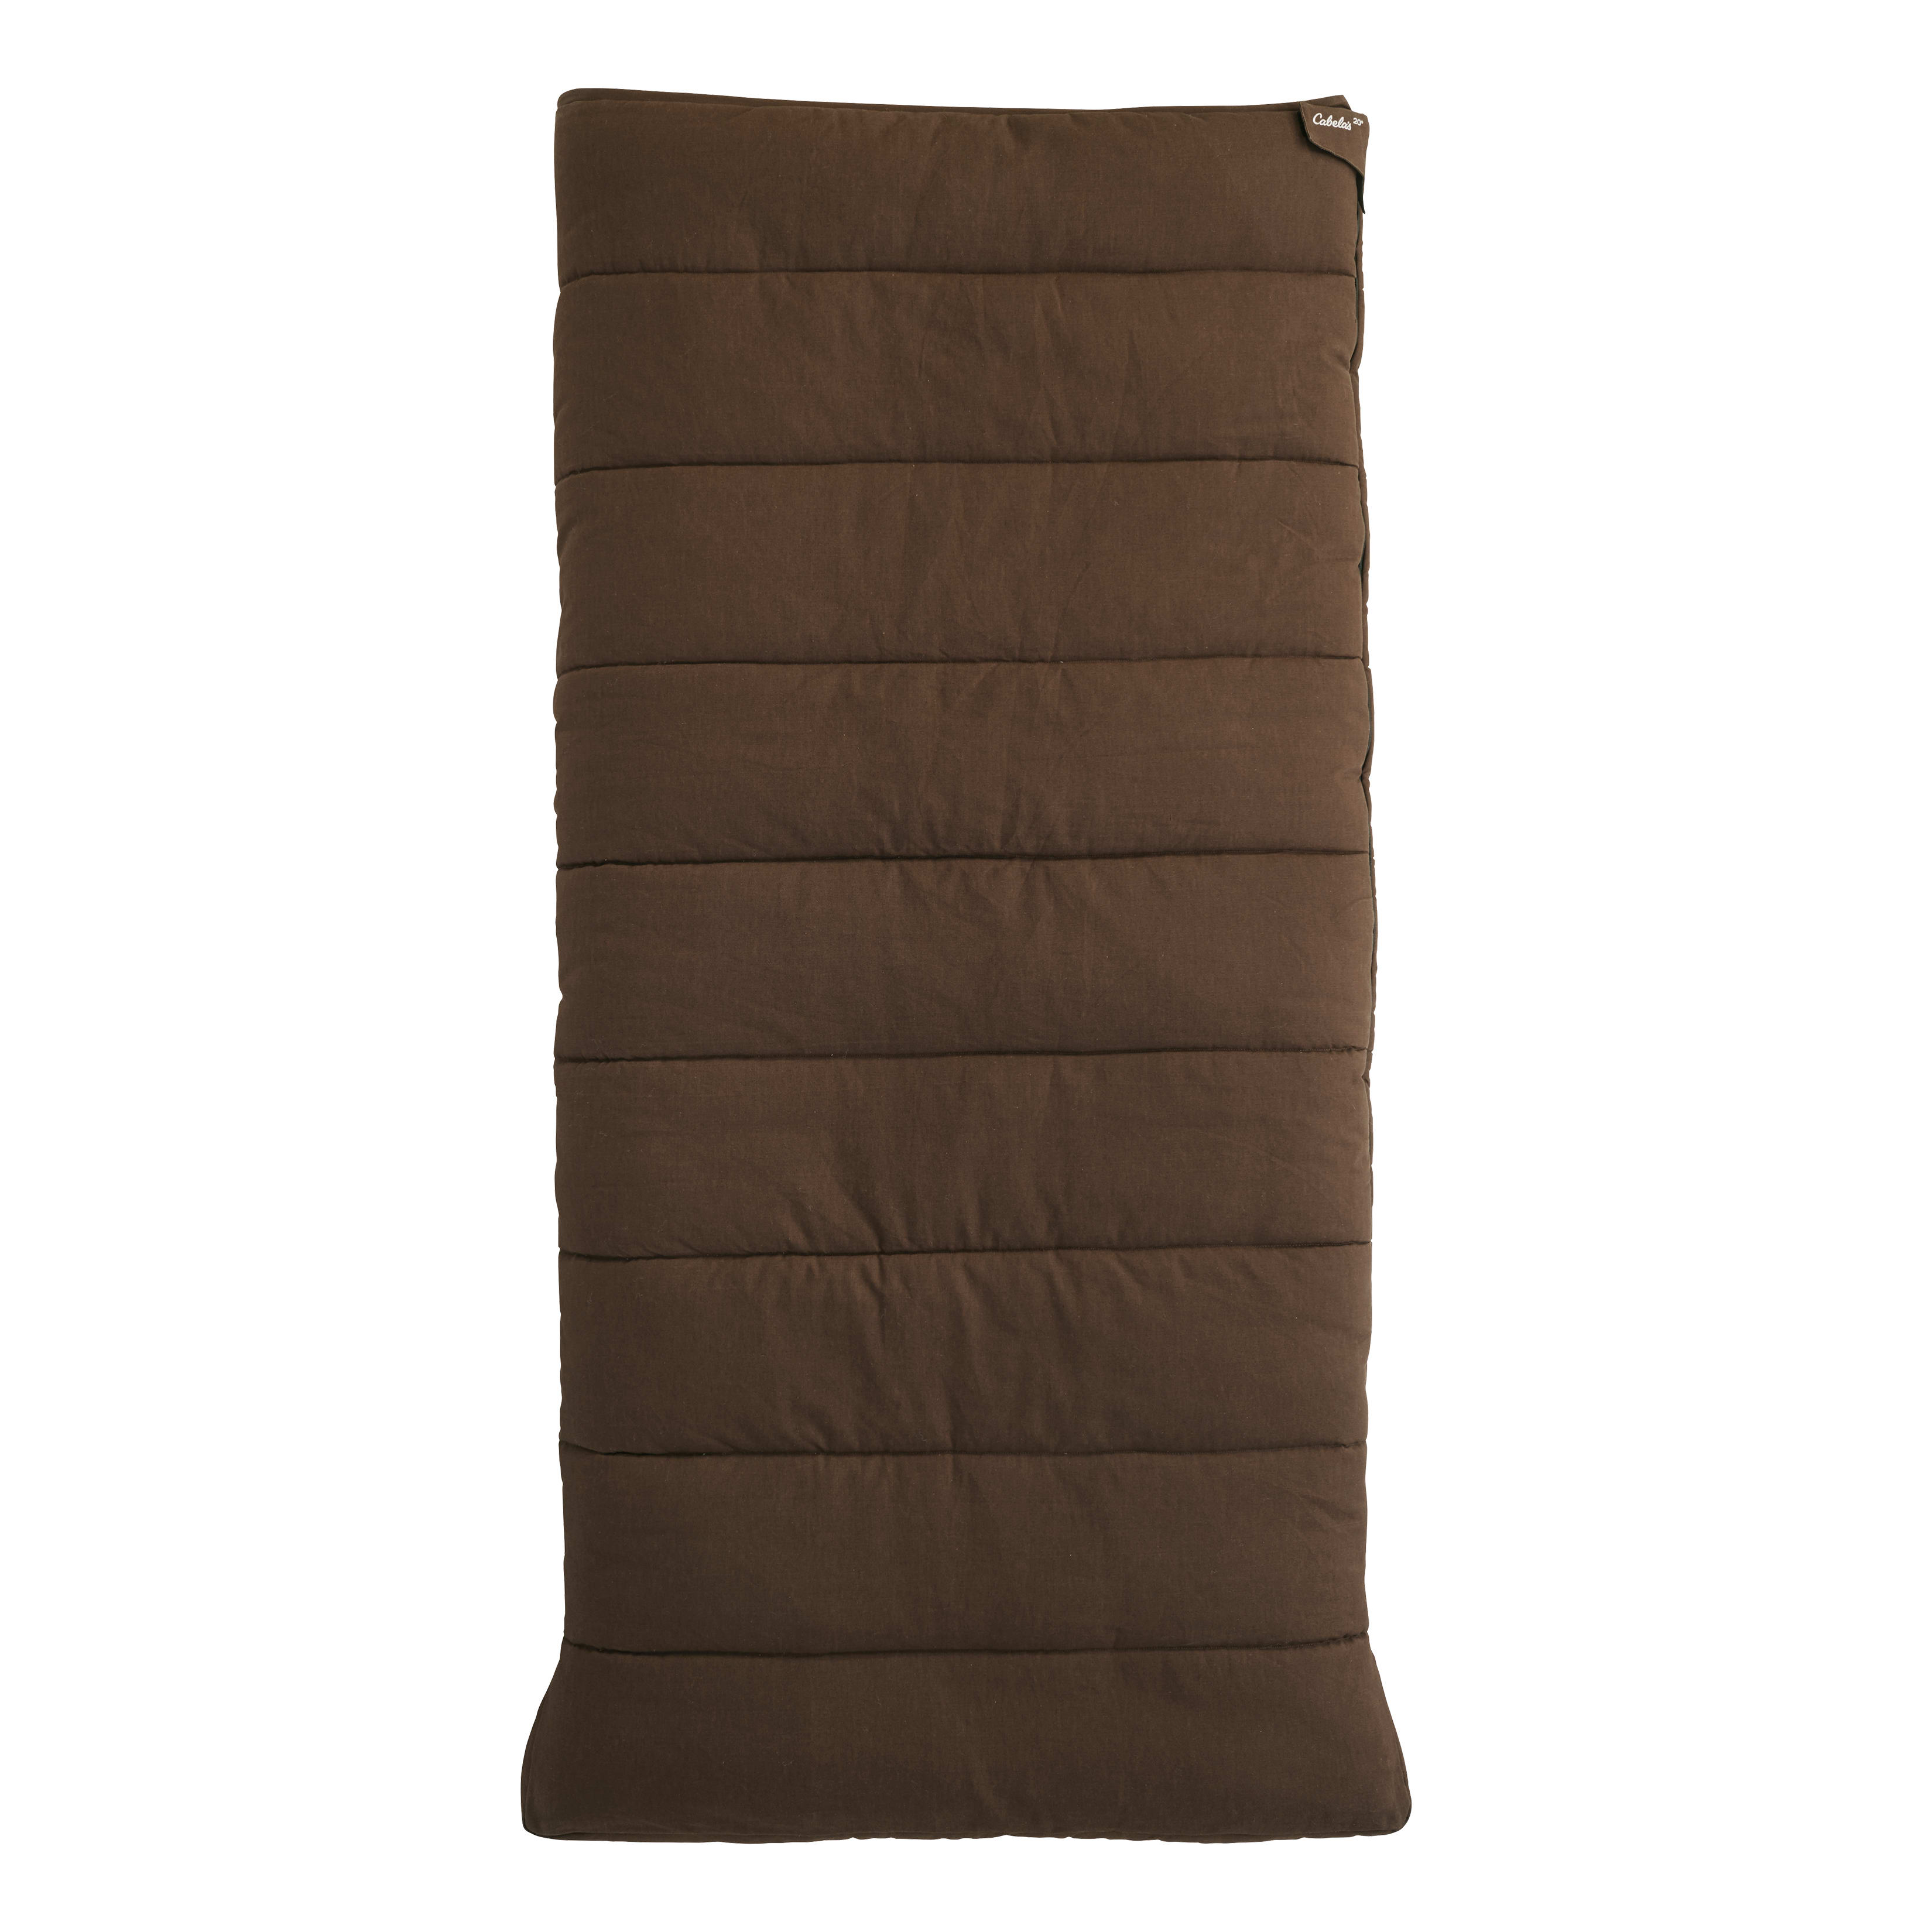 Cabela's Outfitter XL -29°C Sleeping Bag - Fully Zipped Up View